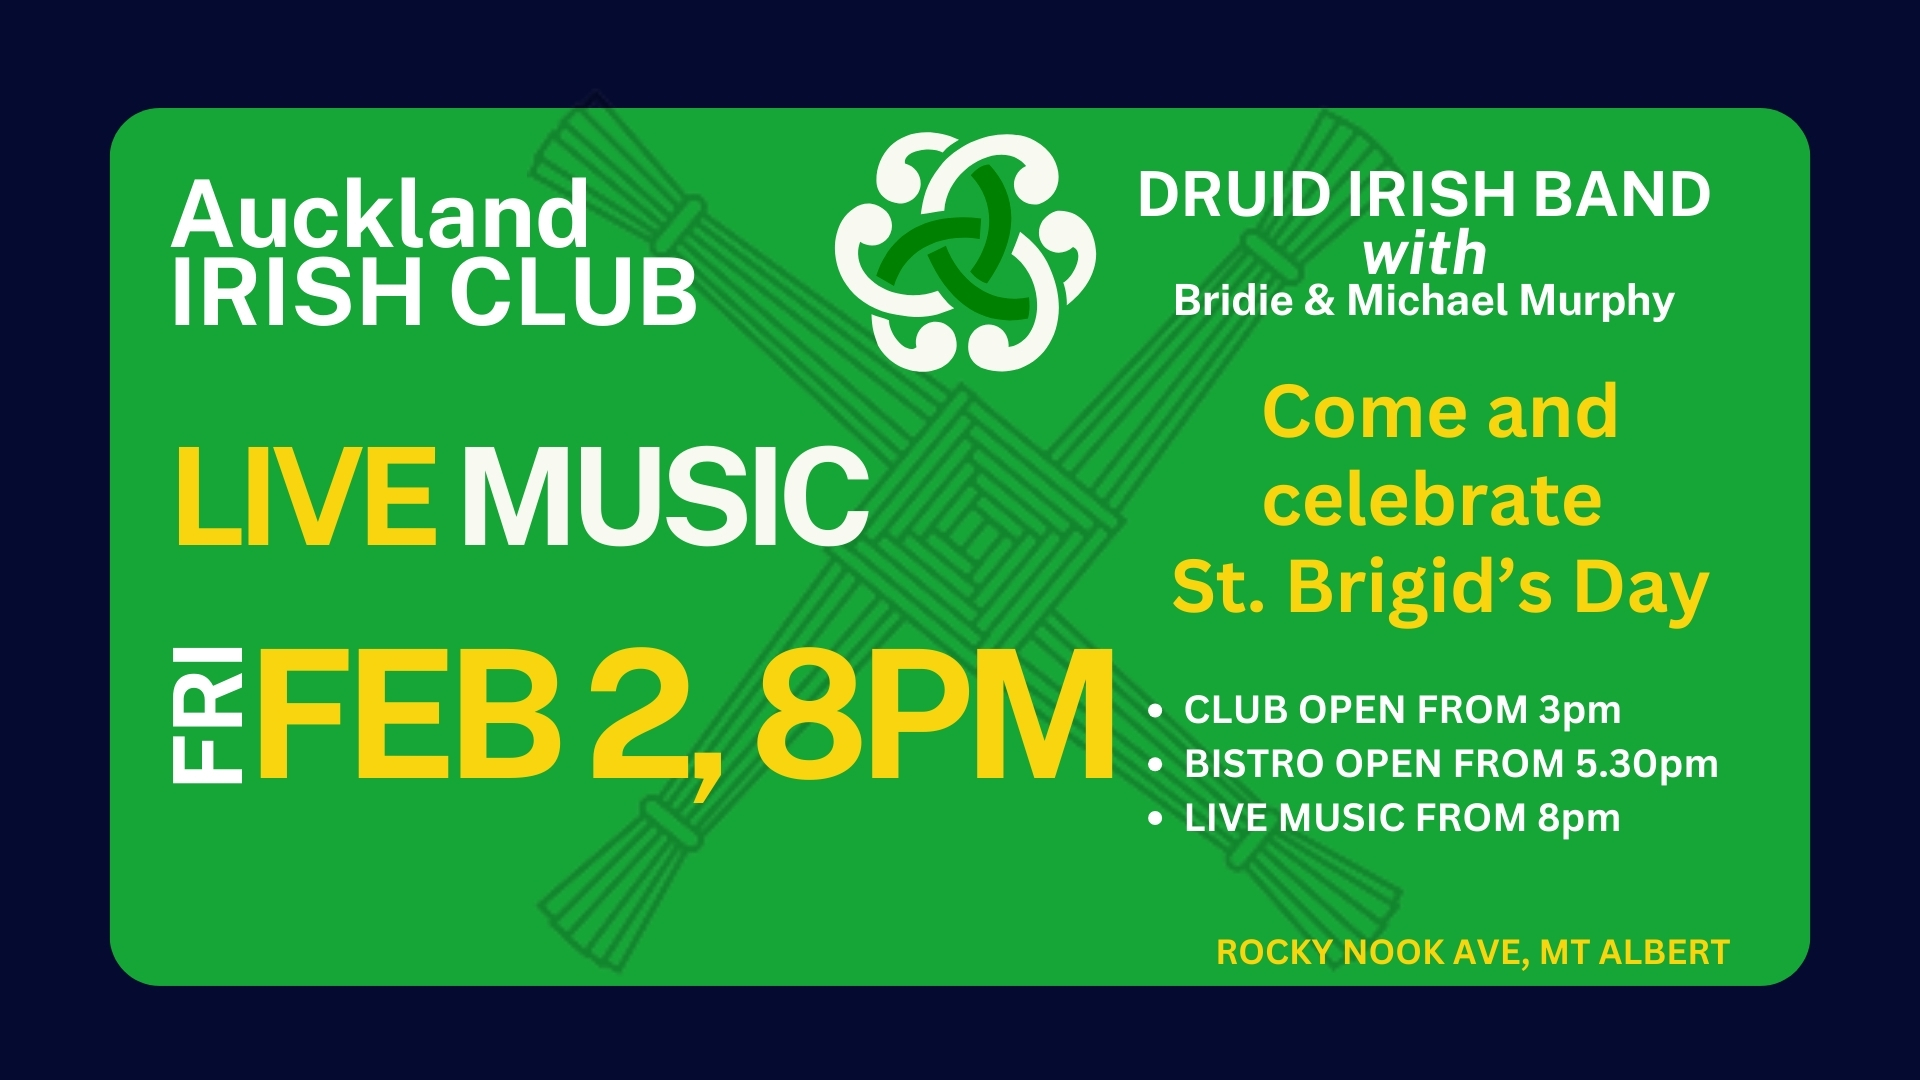 To celebrate St Brigids Day We will have LIVE MUSIC at the the club on Friday 2nd February  DRUID IRISH BAND will be live In the bar from 8pm  Celebrate and dance the night the away  Cold refreshments available from 3pm  Irish Bistro open from 5.30pm  #AllWelcome #StBrigidsDay #Local #IrishInAuckland